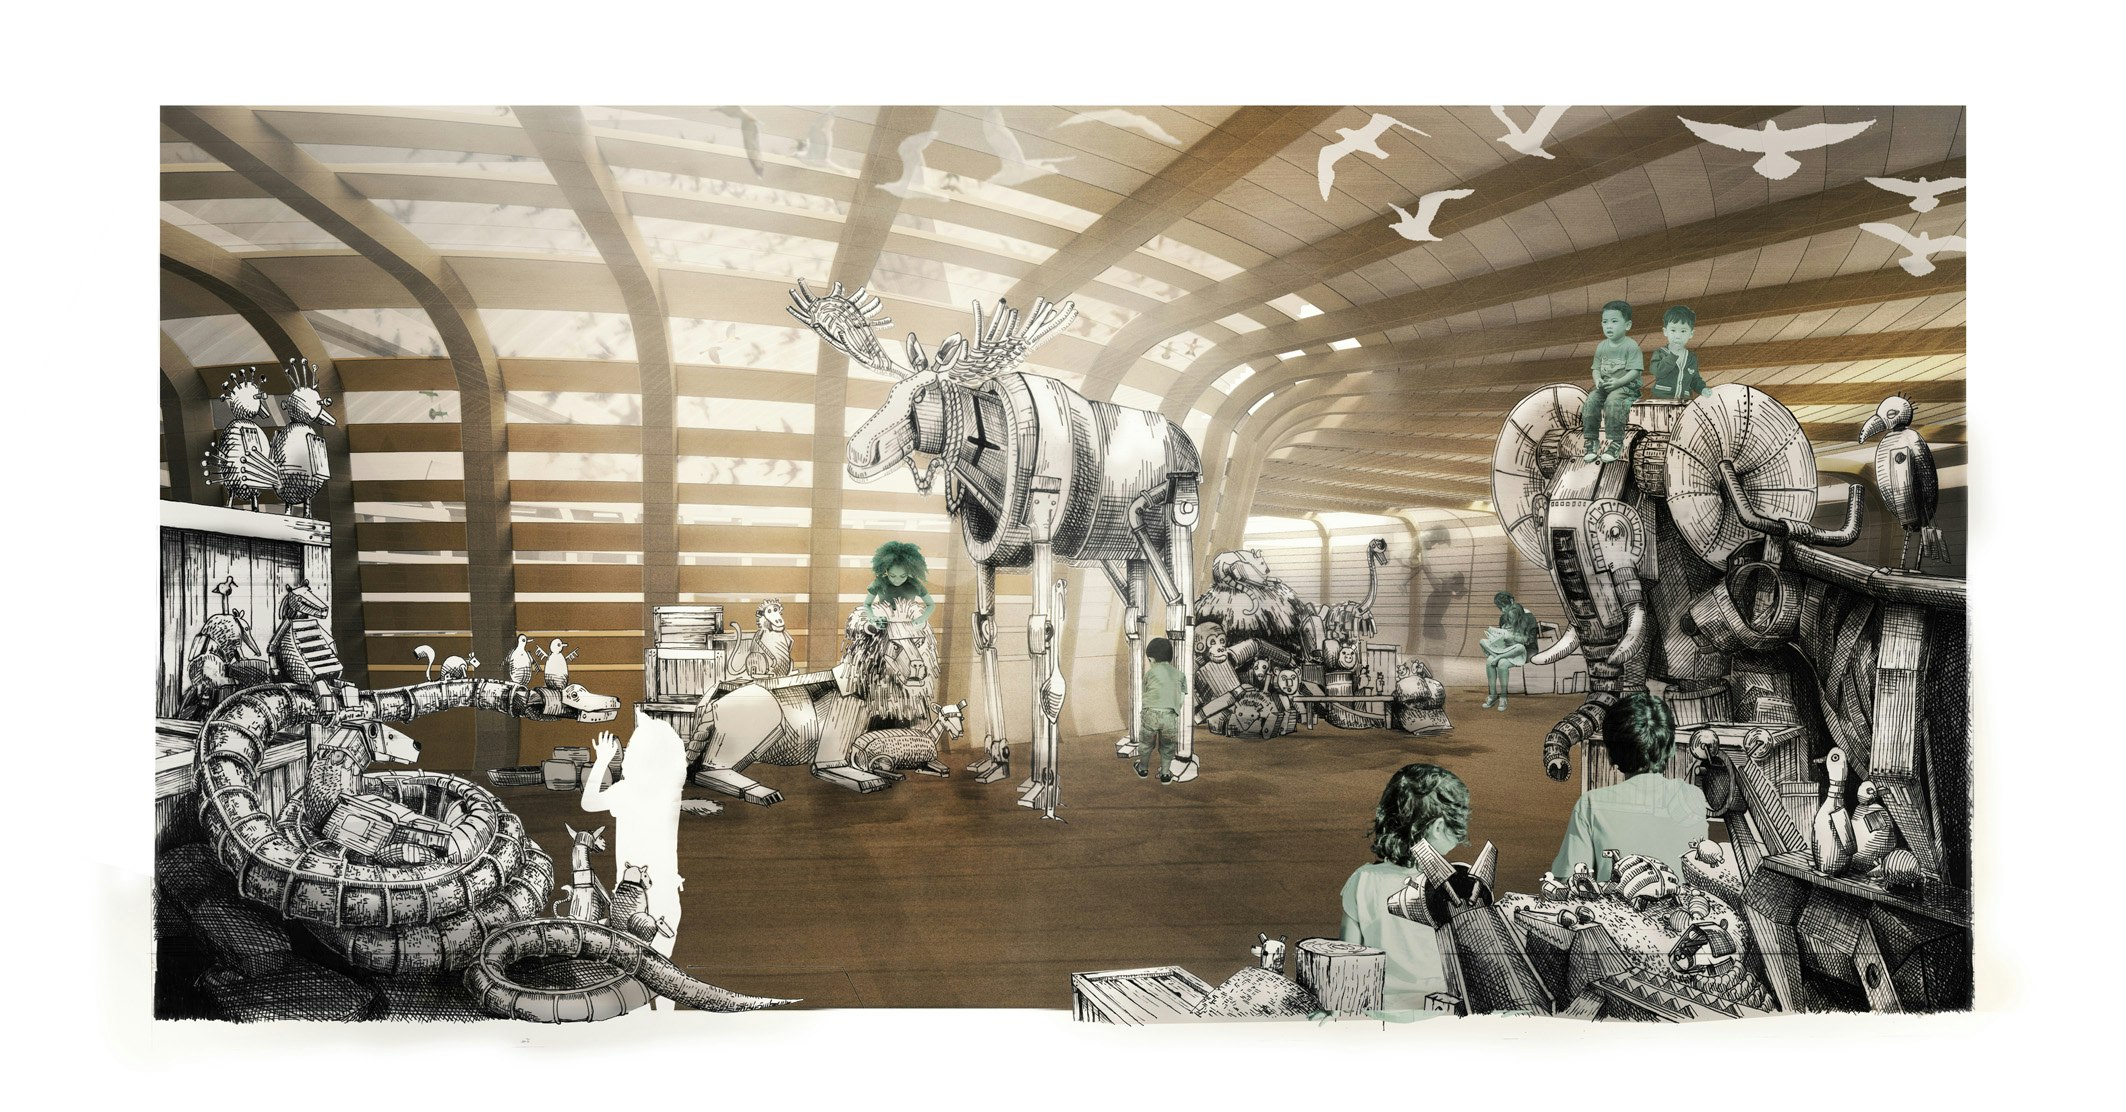 A rendering of animals inspired by Noah's Ark at the Jewish Museum's new children's wing